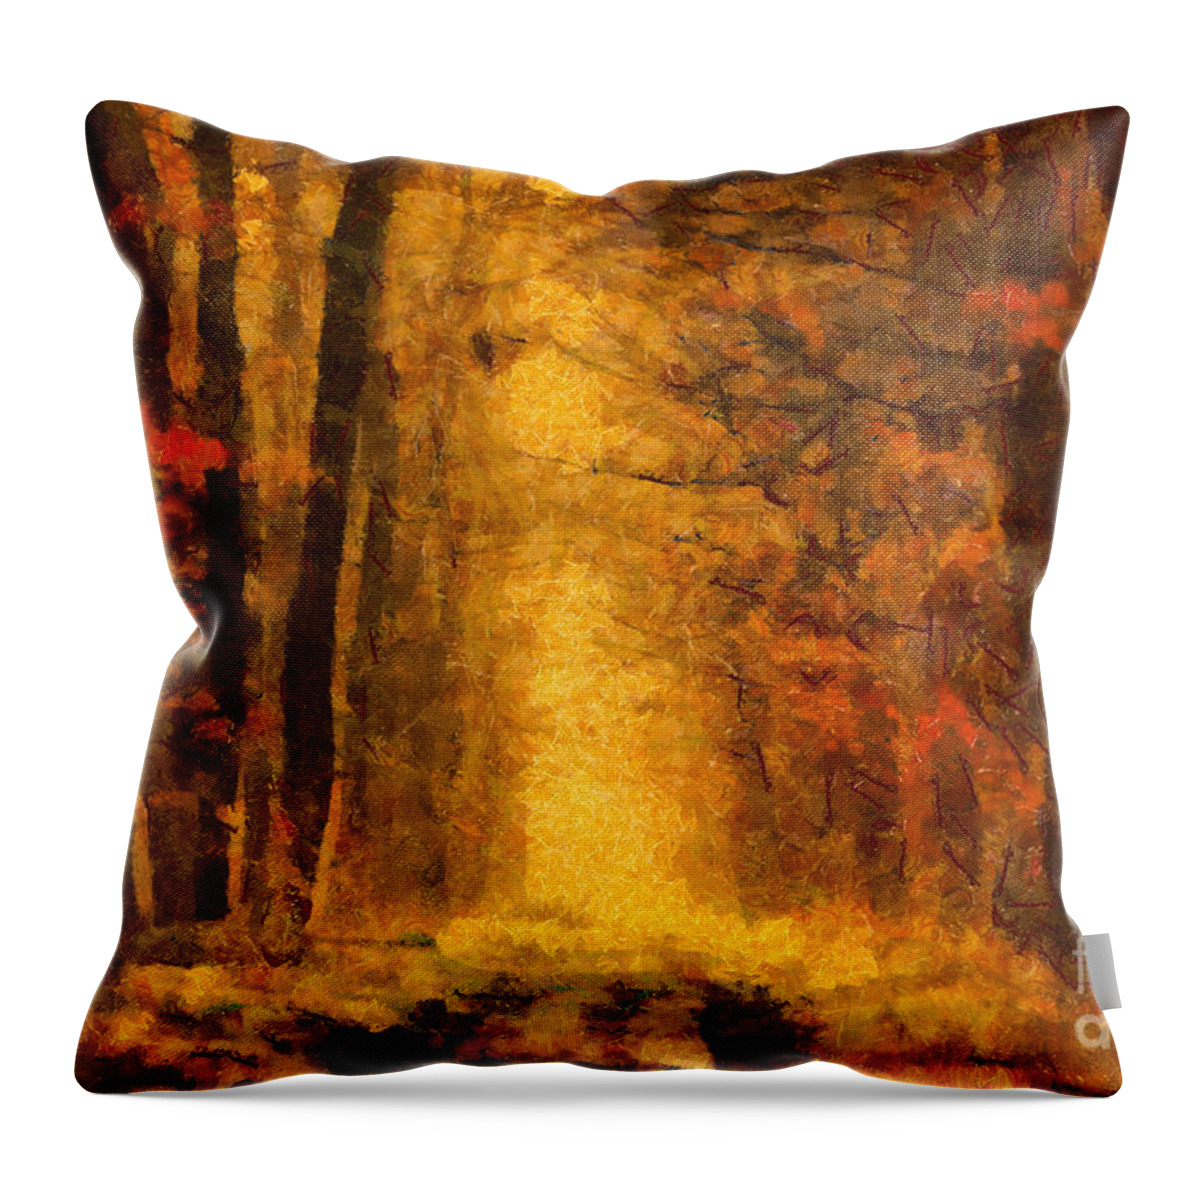 Painting Throw Pillow featuring the painting Forest Leaves by Dimitar Hristov